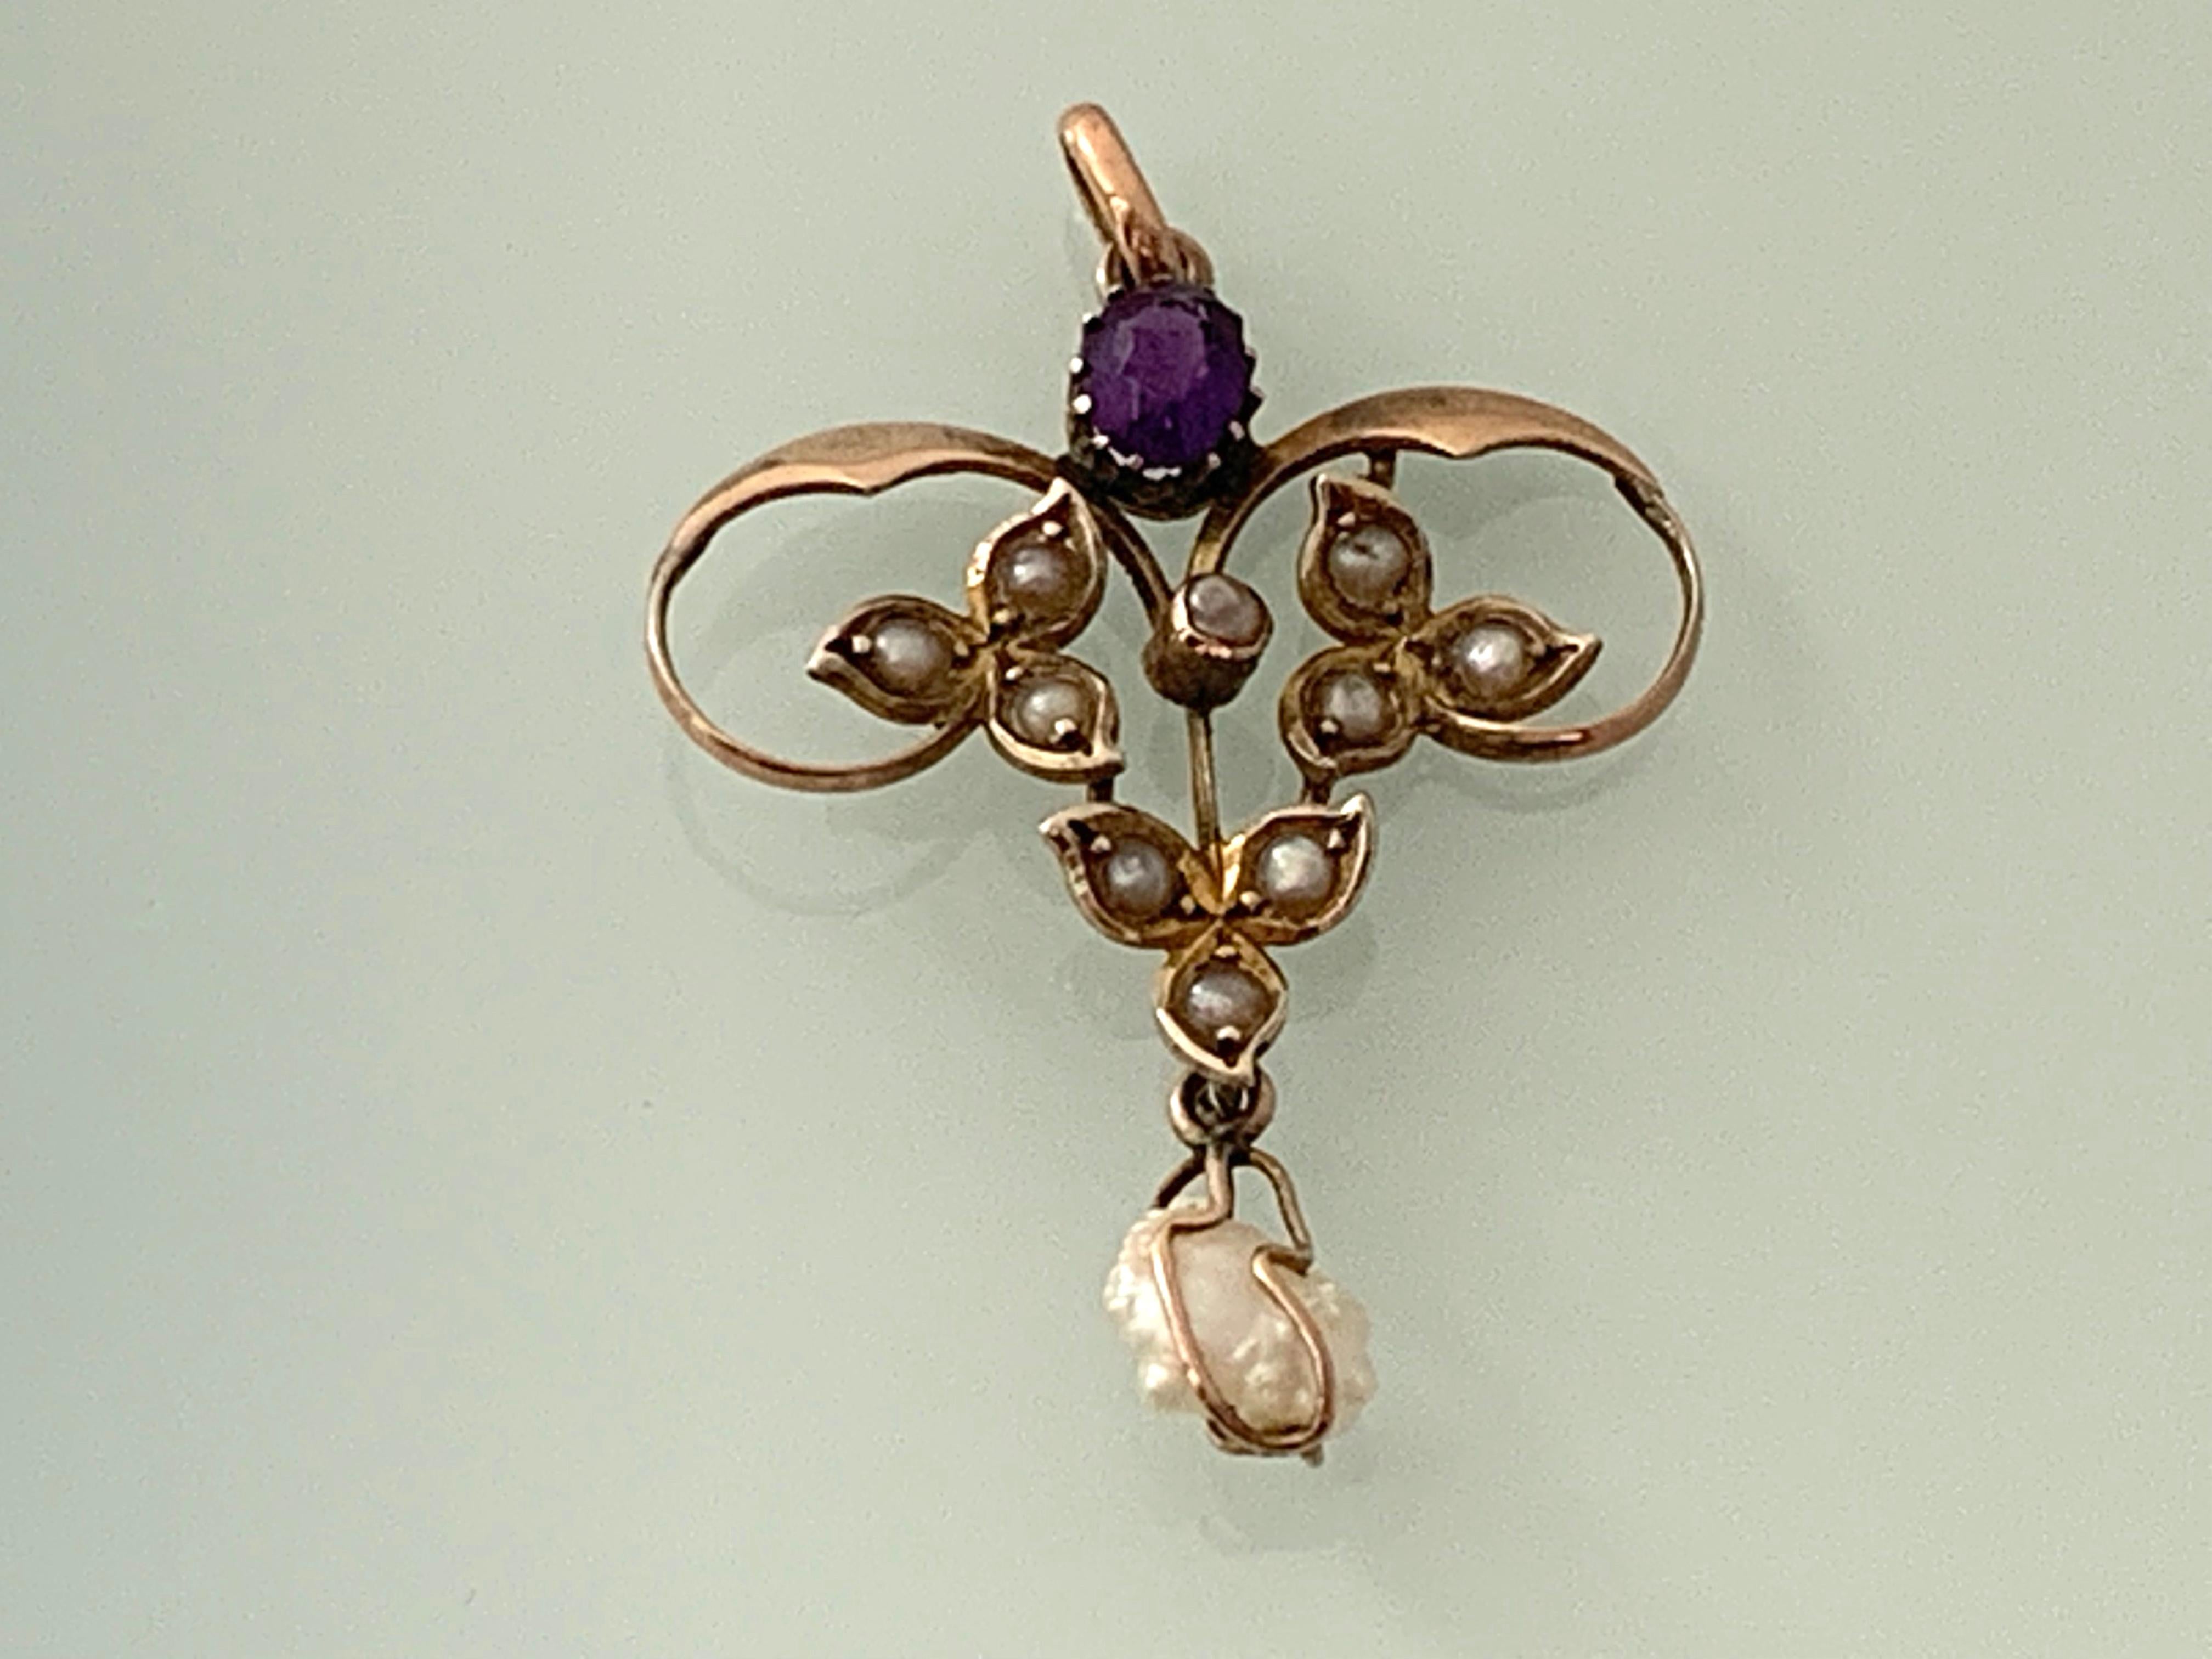 9ct Gold Antique Victorian Pendant 
which is adorned with  ten seed pearls 
and a finale blister pearl thats swings encaged 
topped by a purple oval gemstone.
Stamped 9ct top right side on reverse.
Bail is closed .
Pendant is handmade late 19